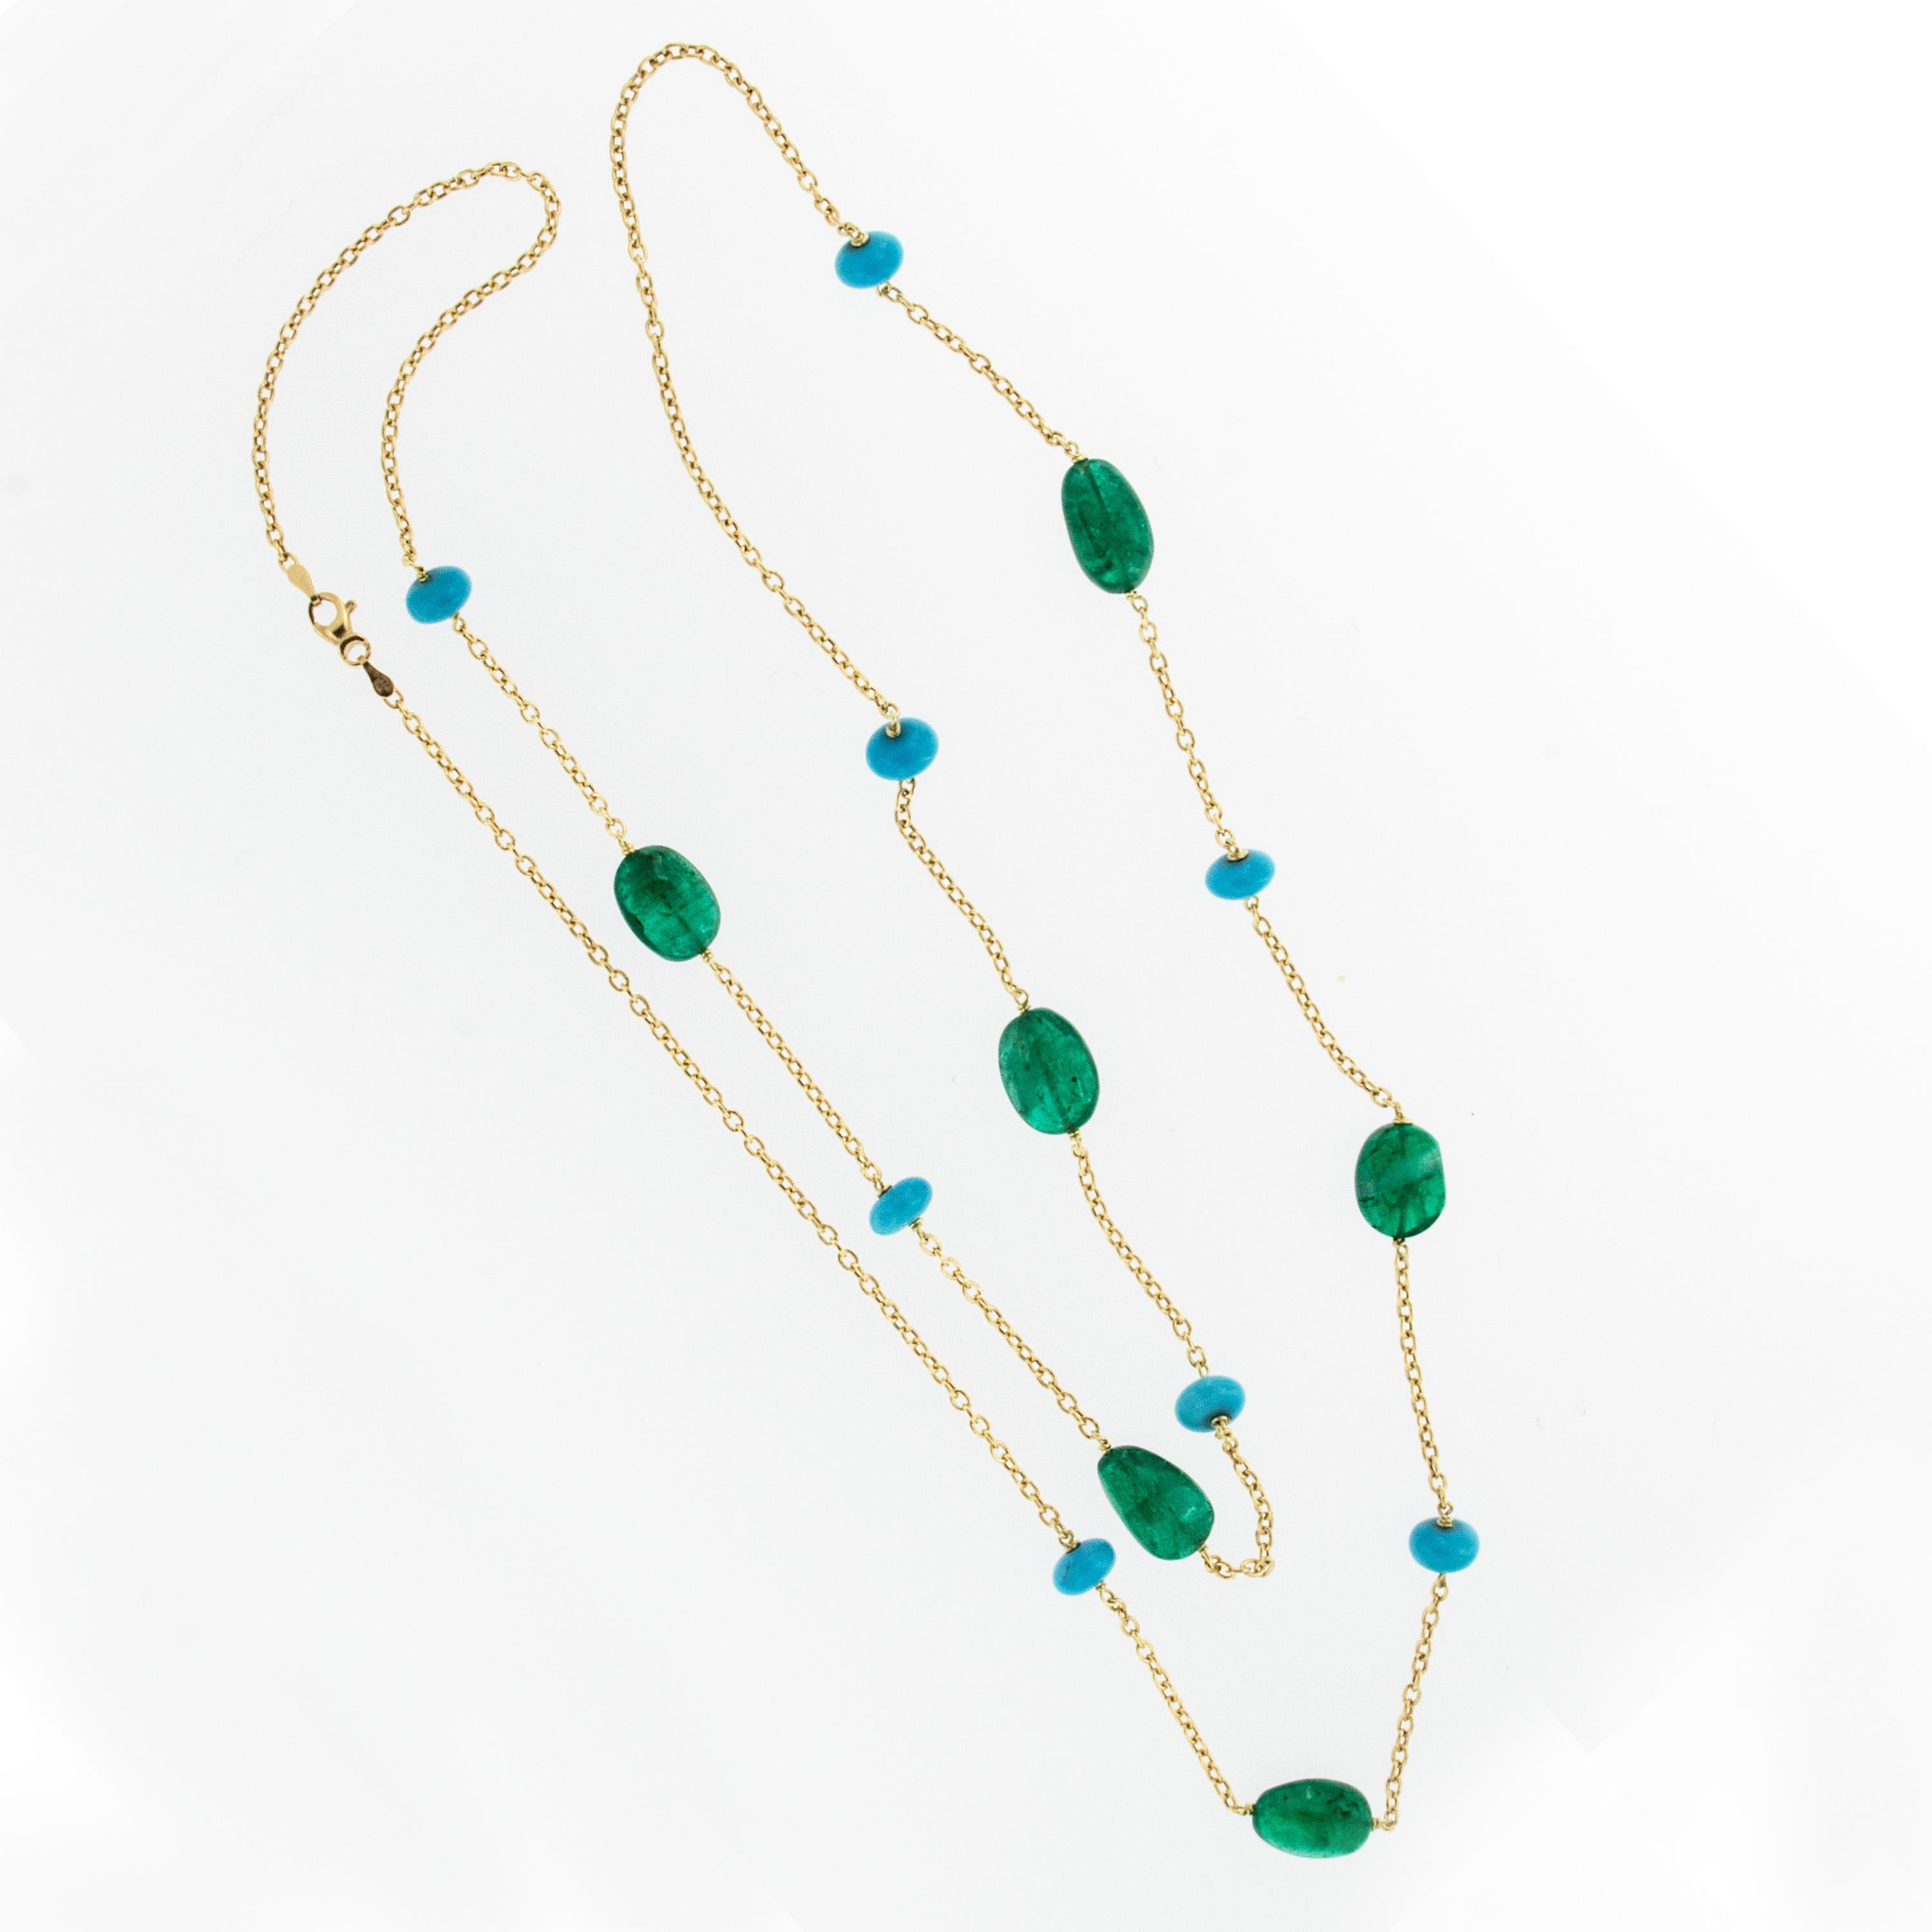 Goshwara is a company known for exceptional color gems. Go Beyond expectations & Go Beyond limits with this precious Sleeping Beauty Turquoise & Emerald whimsical necklace.  The Beyond Collection pieces are ‘One of a Kinds’ due to their stunning and